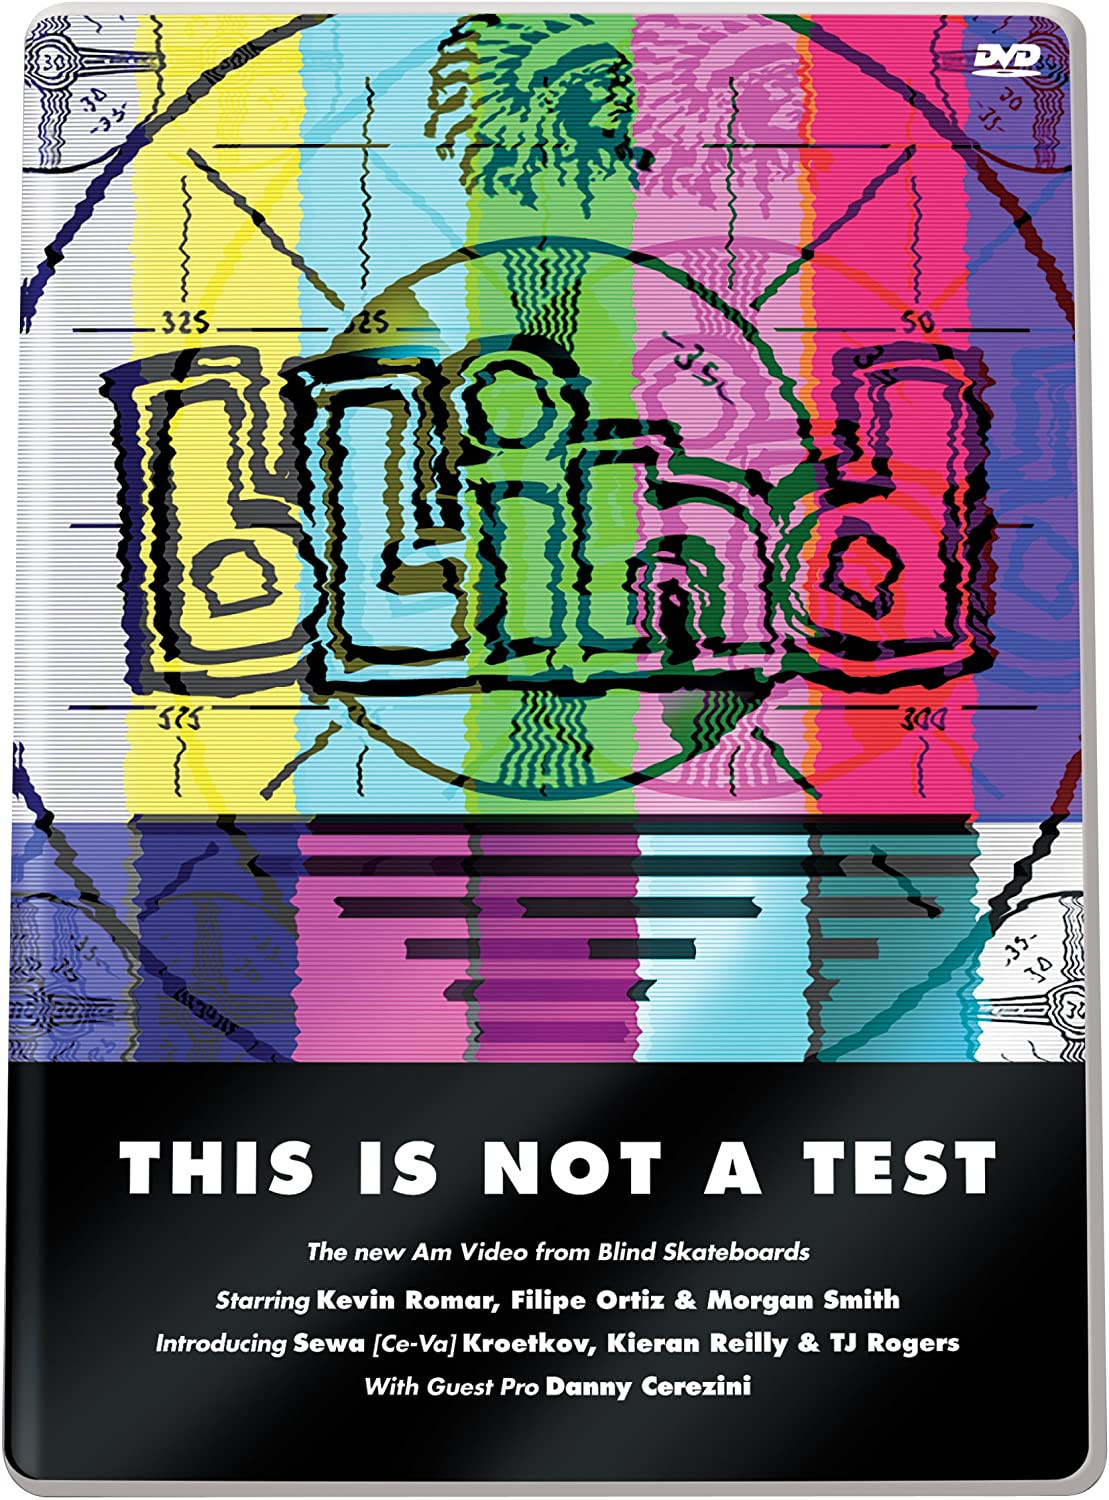 This is not a test by Blind Skateboards video cover